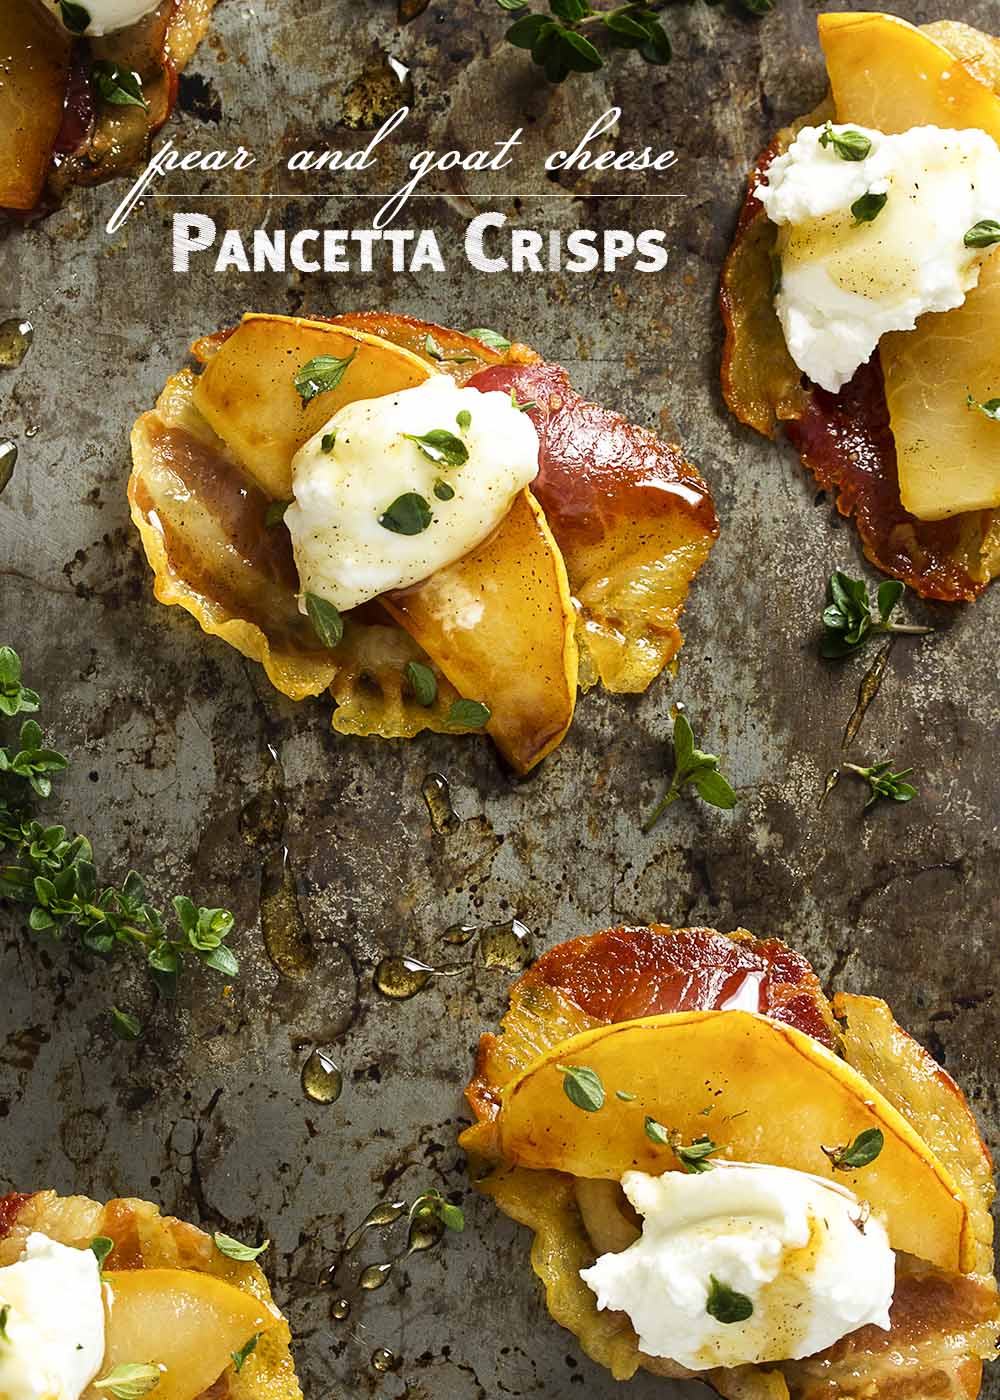 Pear slices and pancetta crisps combine with goat cheese and a drizzle of spiced honey in this unique and simple party appetizer. | justalittlebitofbacon.com